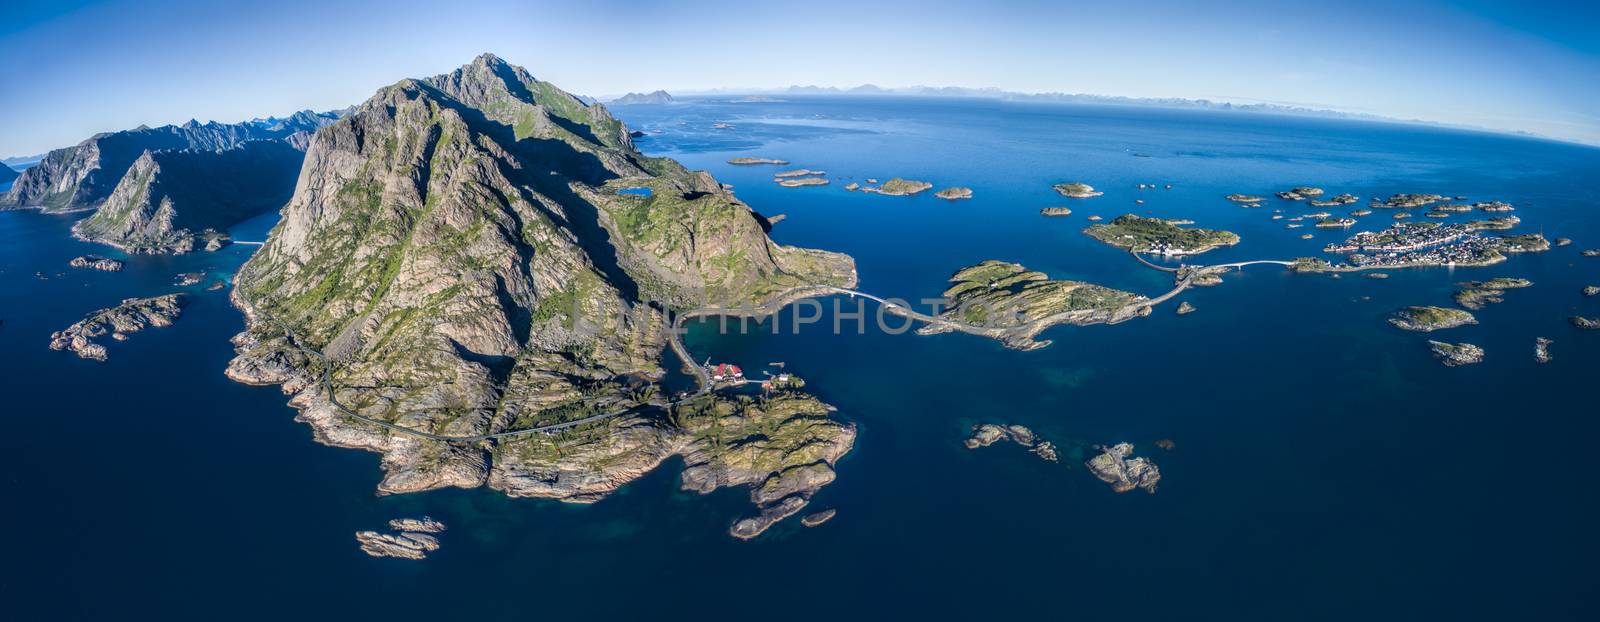 Scenic aerial view of picturesque fishing town Henningsvaer on Lofoten islands, Norway